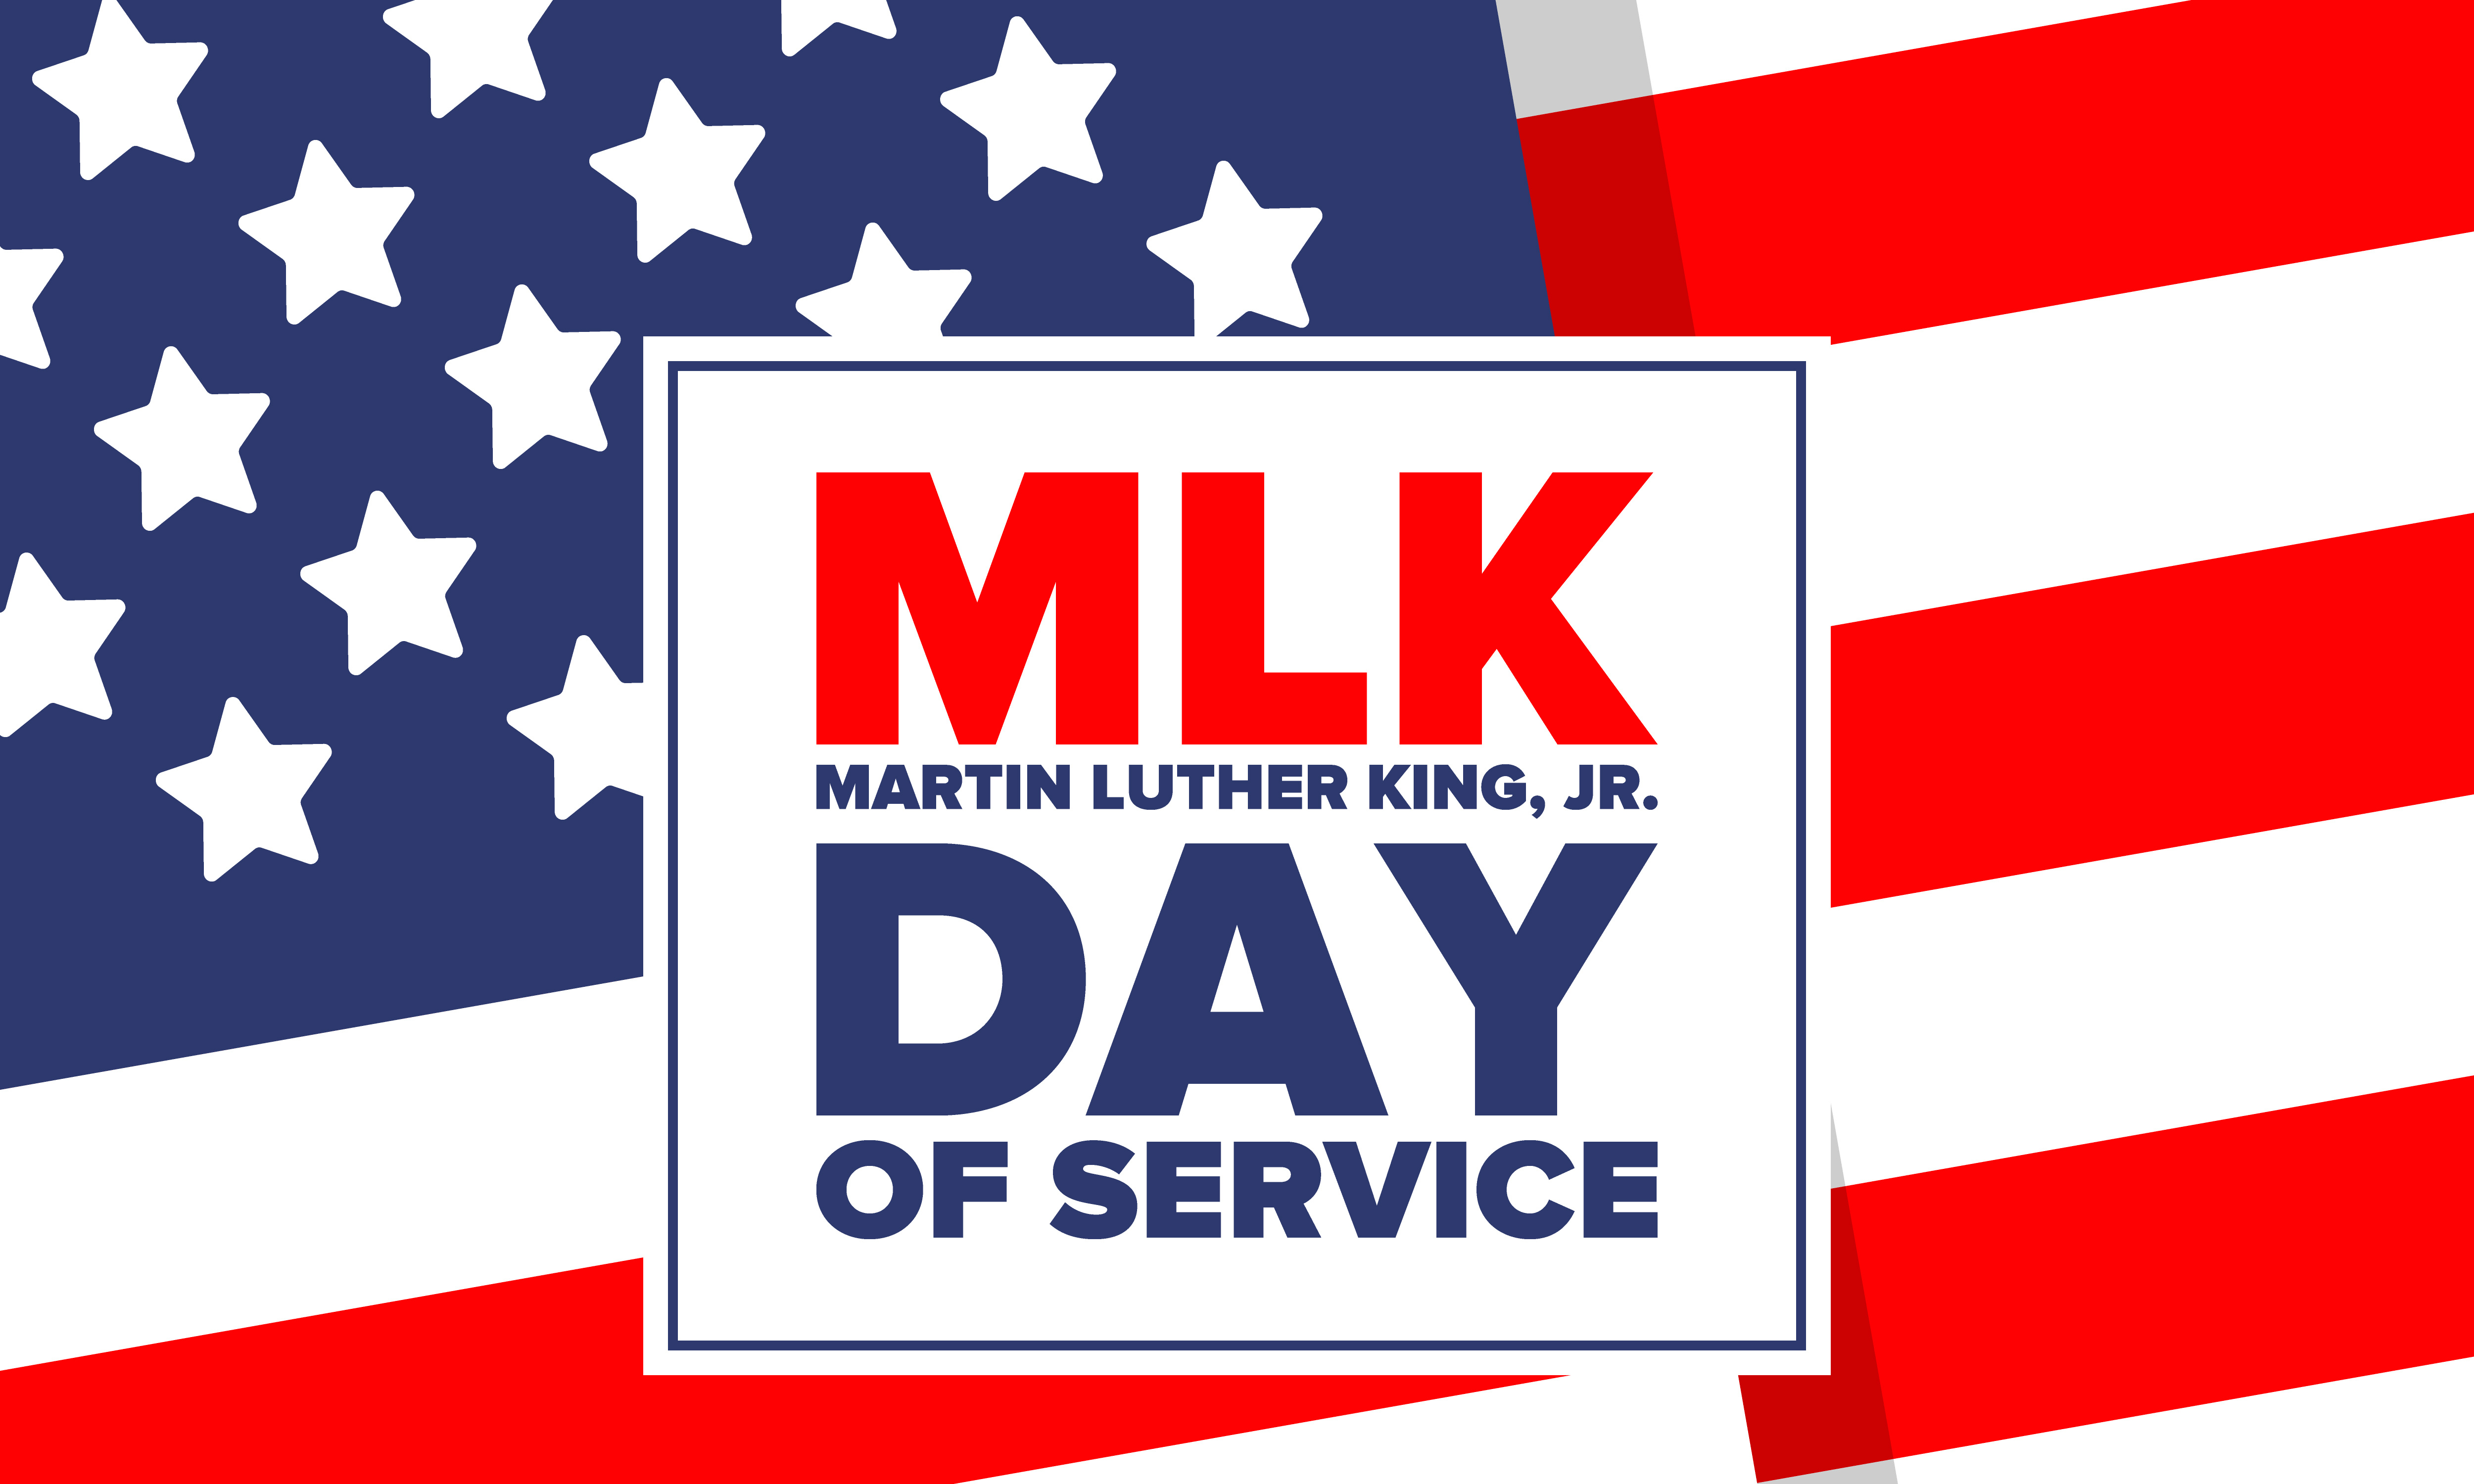 MLK Martin Luther King Jr Day of Service with American Flag in the background